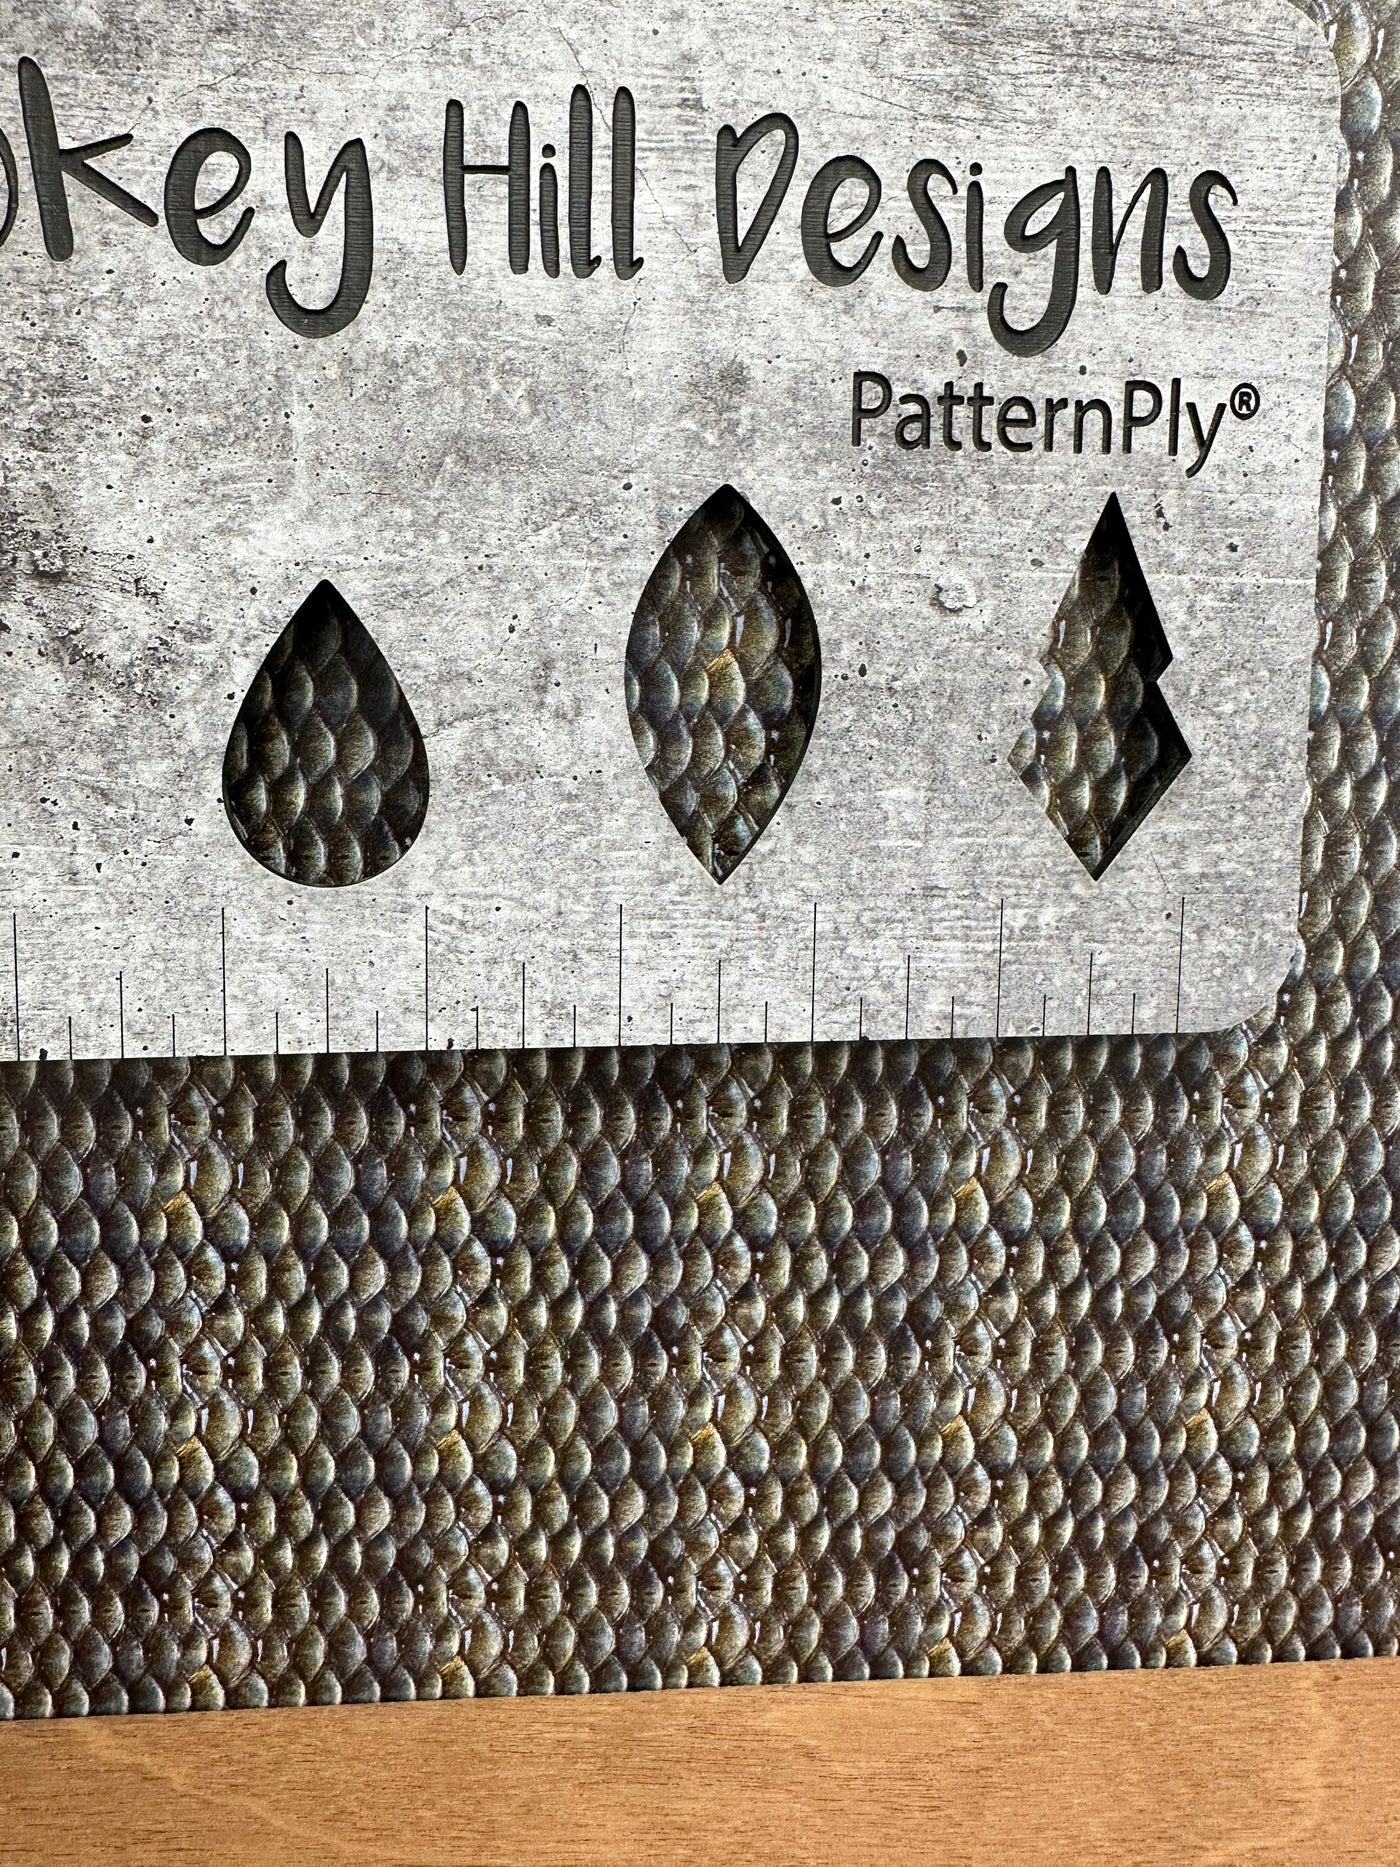 PatternPly® Silver Fish Scales